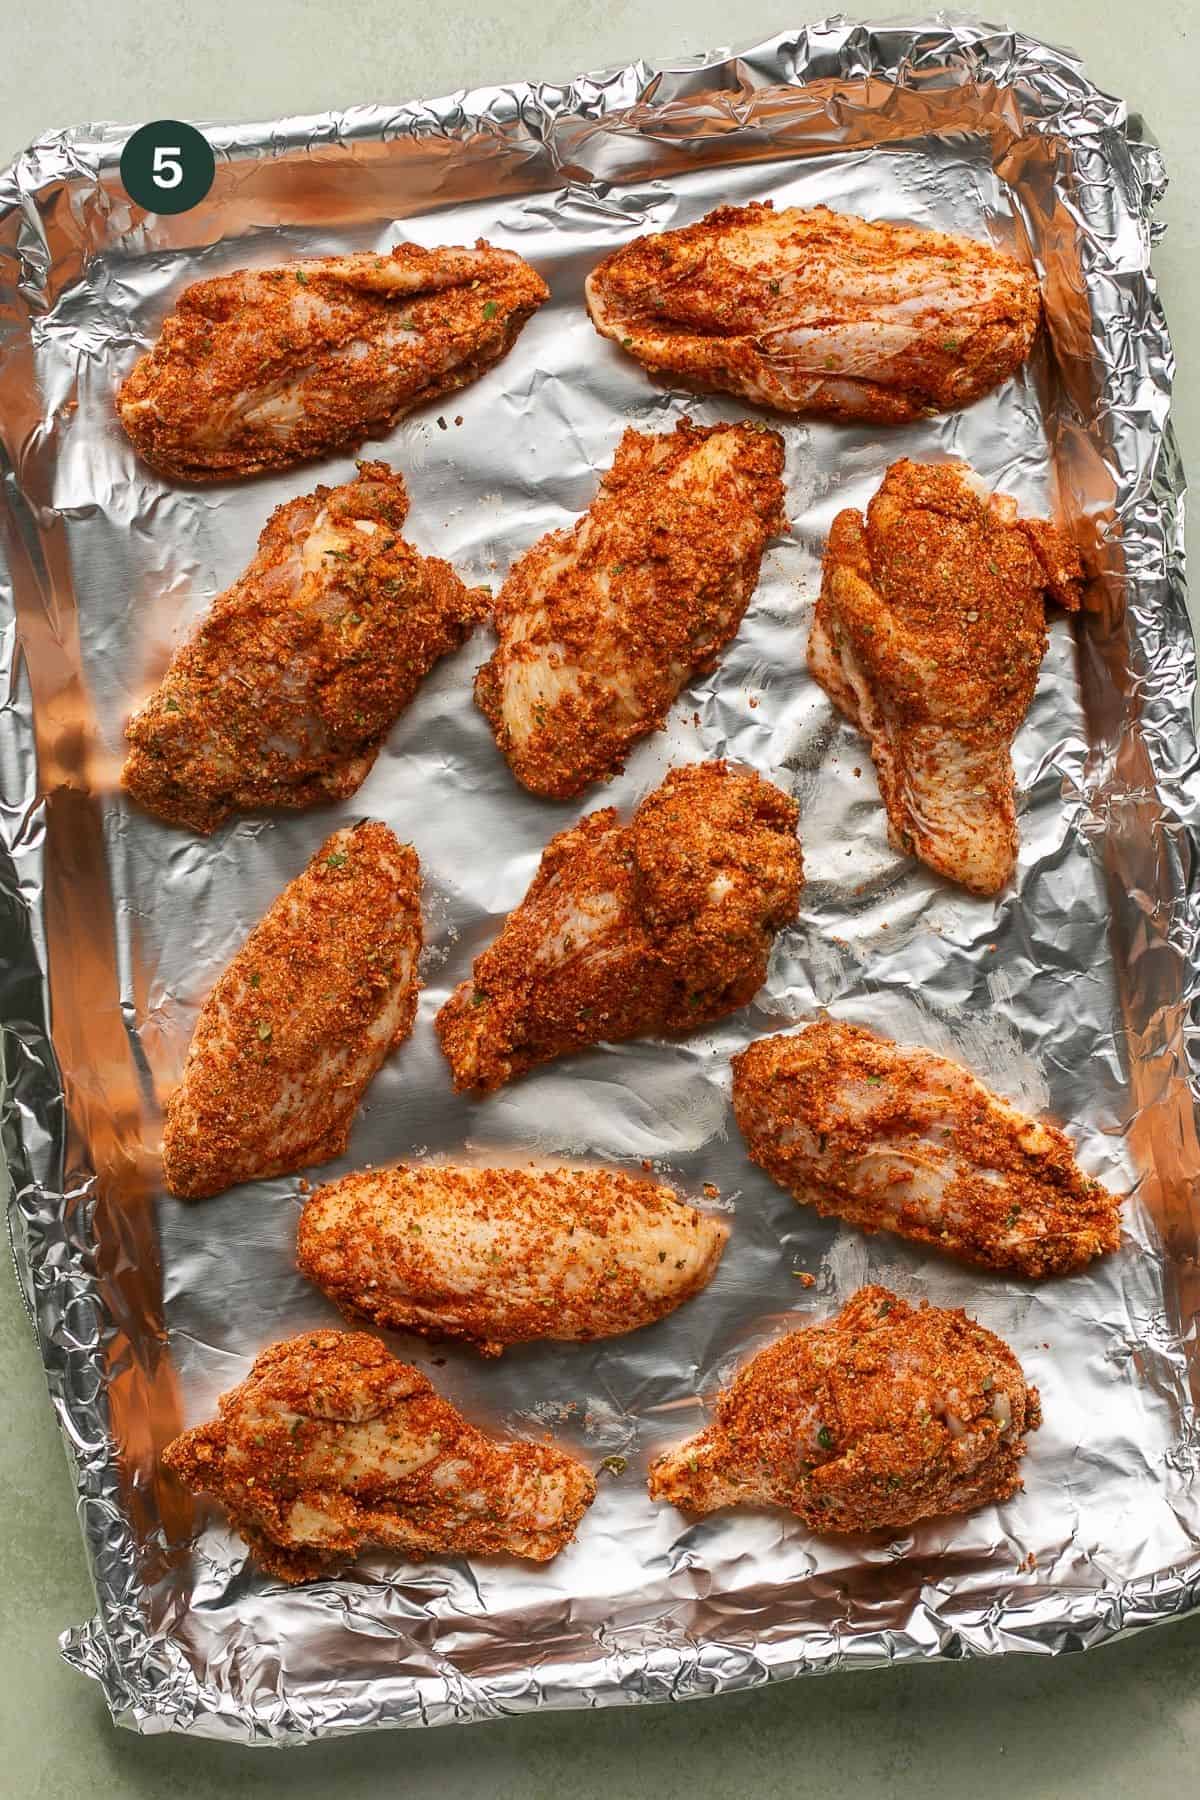 Wings laid out on a foil lined pan to bake.